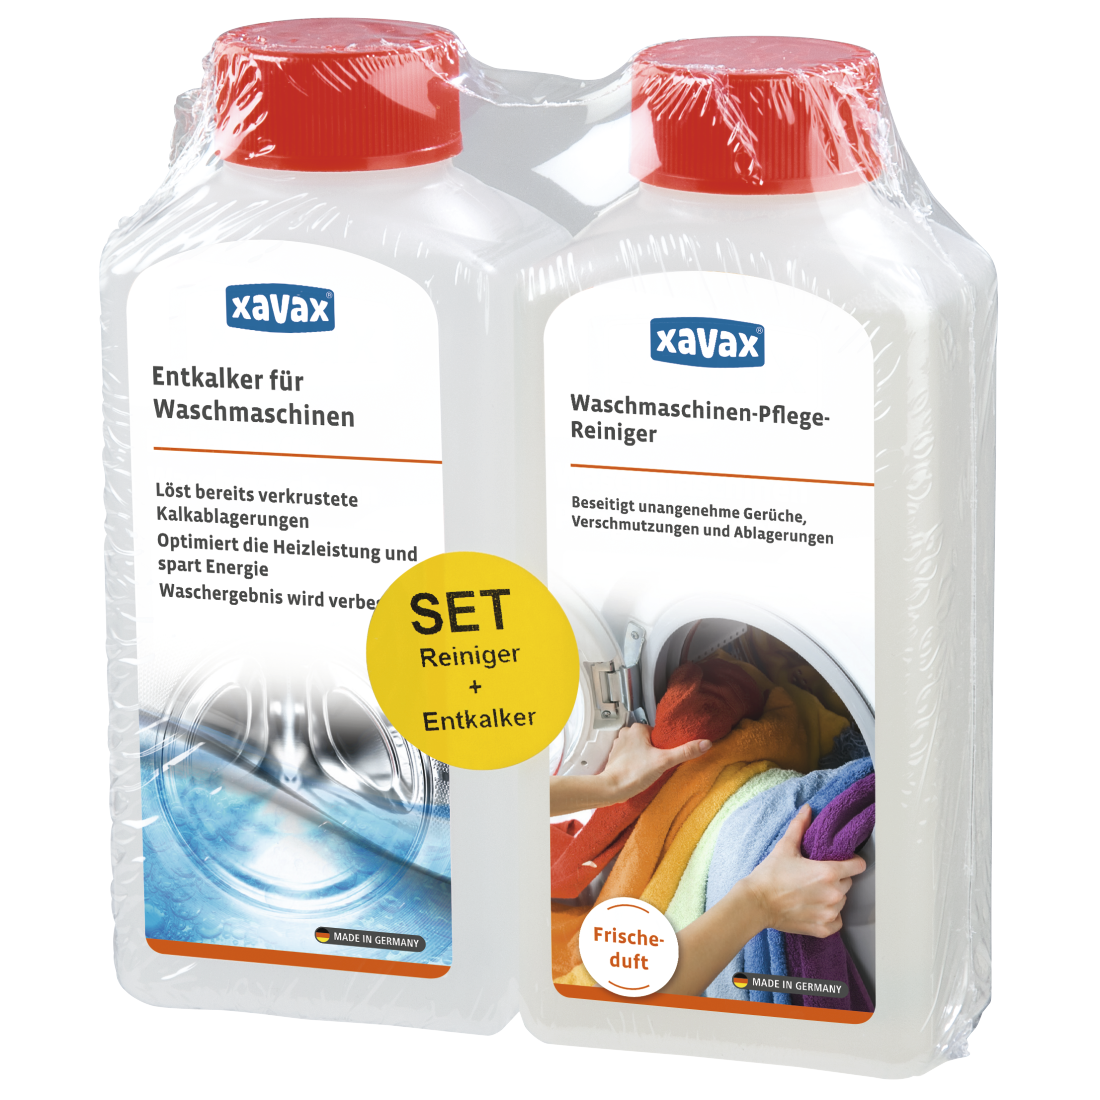 abx3 High-Res Image 3 - Xavax, Washing Machine Care Kit, Descaler + Cleaner